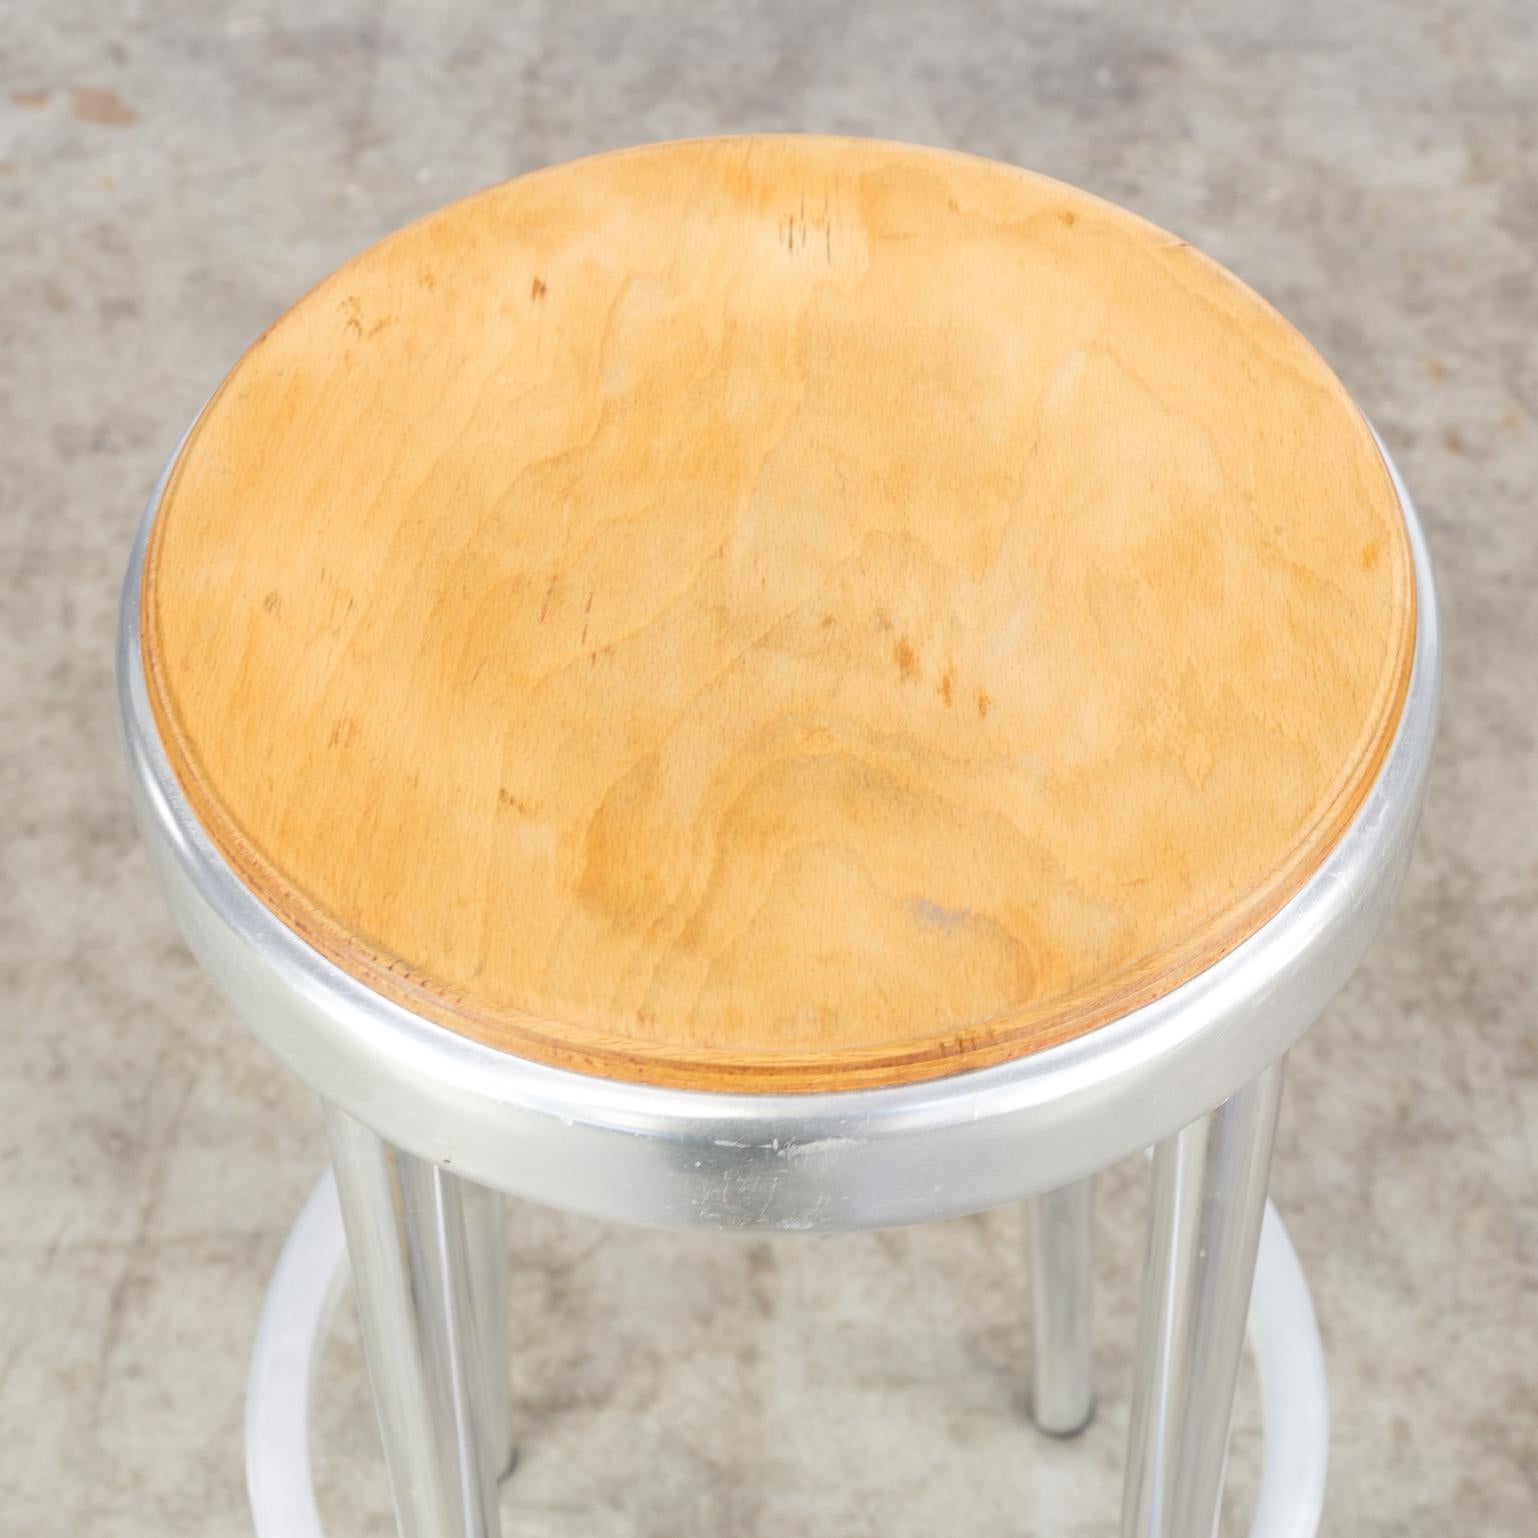 Midcentury Aluminium Framed Wooden Seated Stools Set of 2 For Sale 3